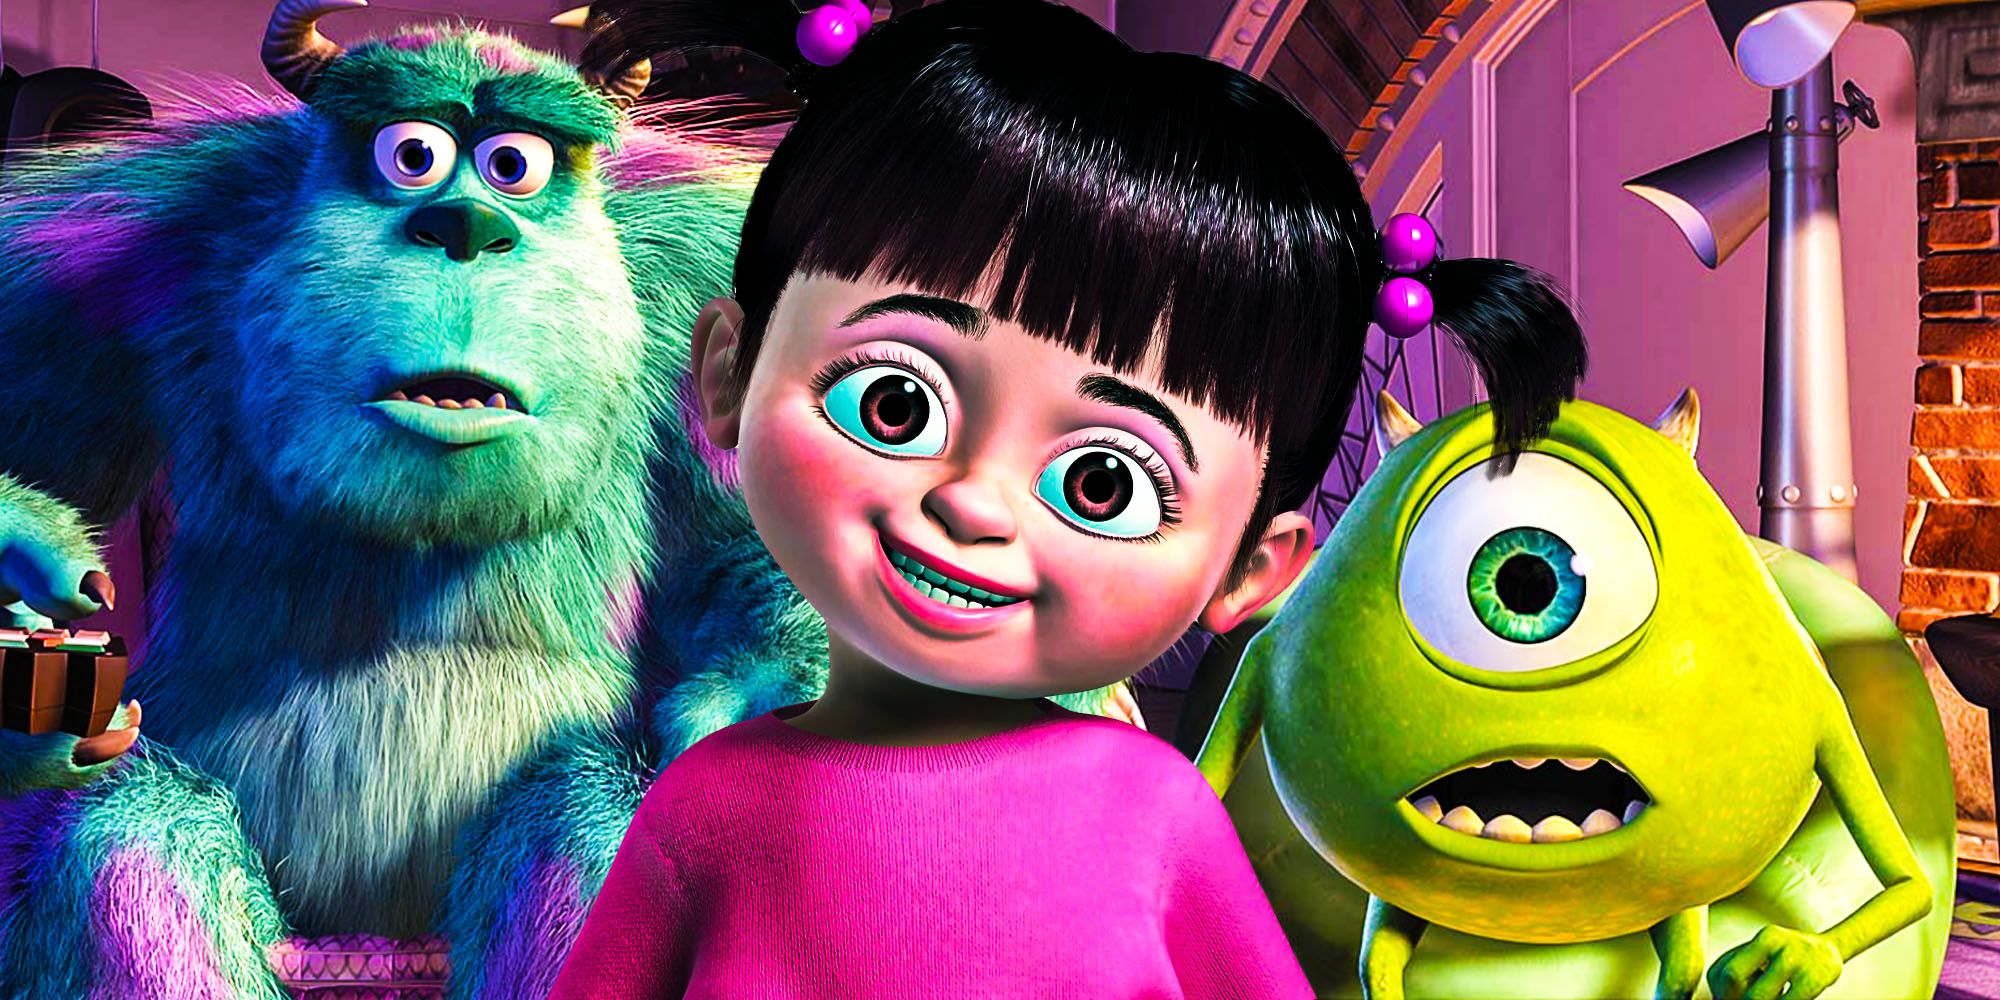 How would a Monsters Inc Live Action remake work out? Like, could